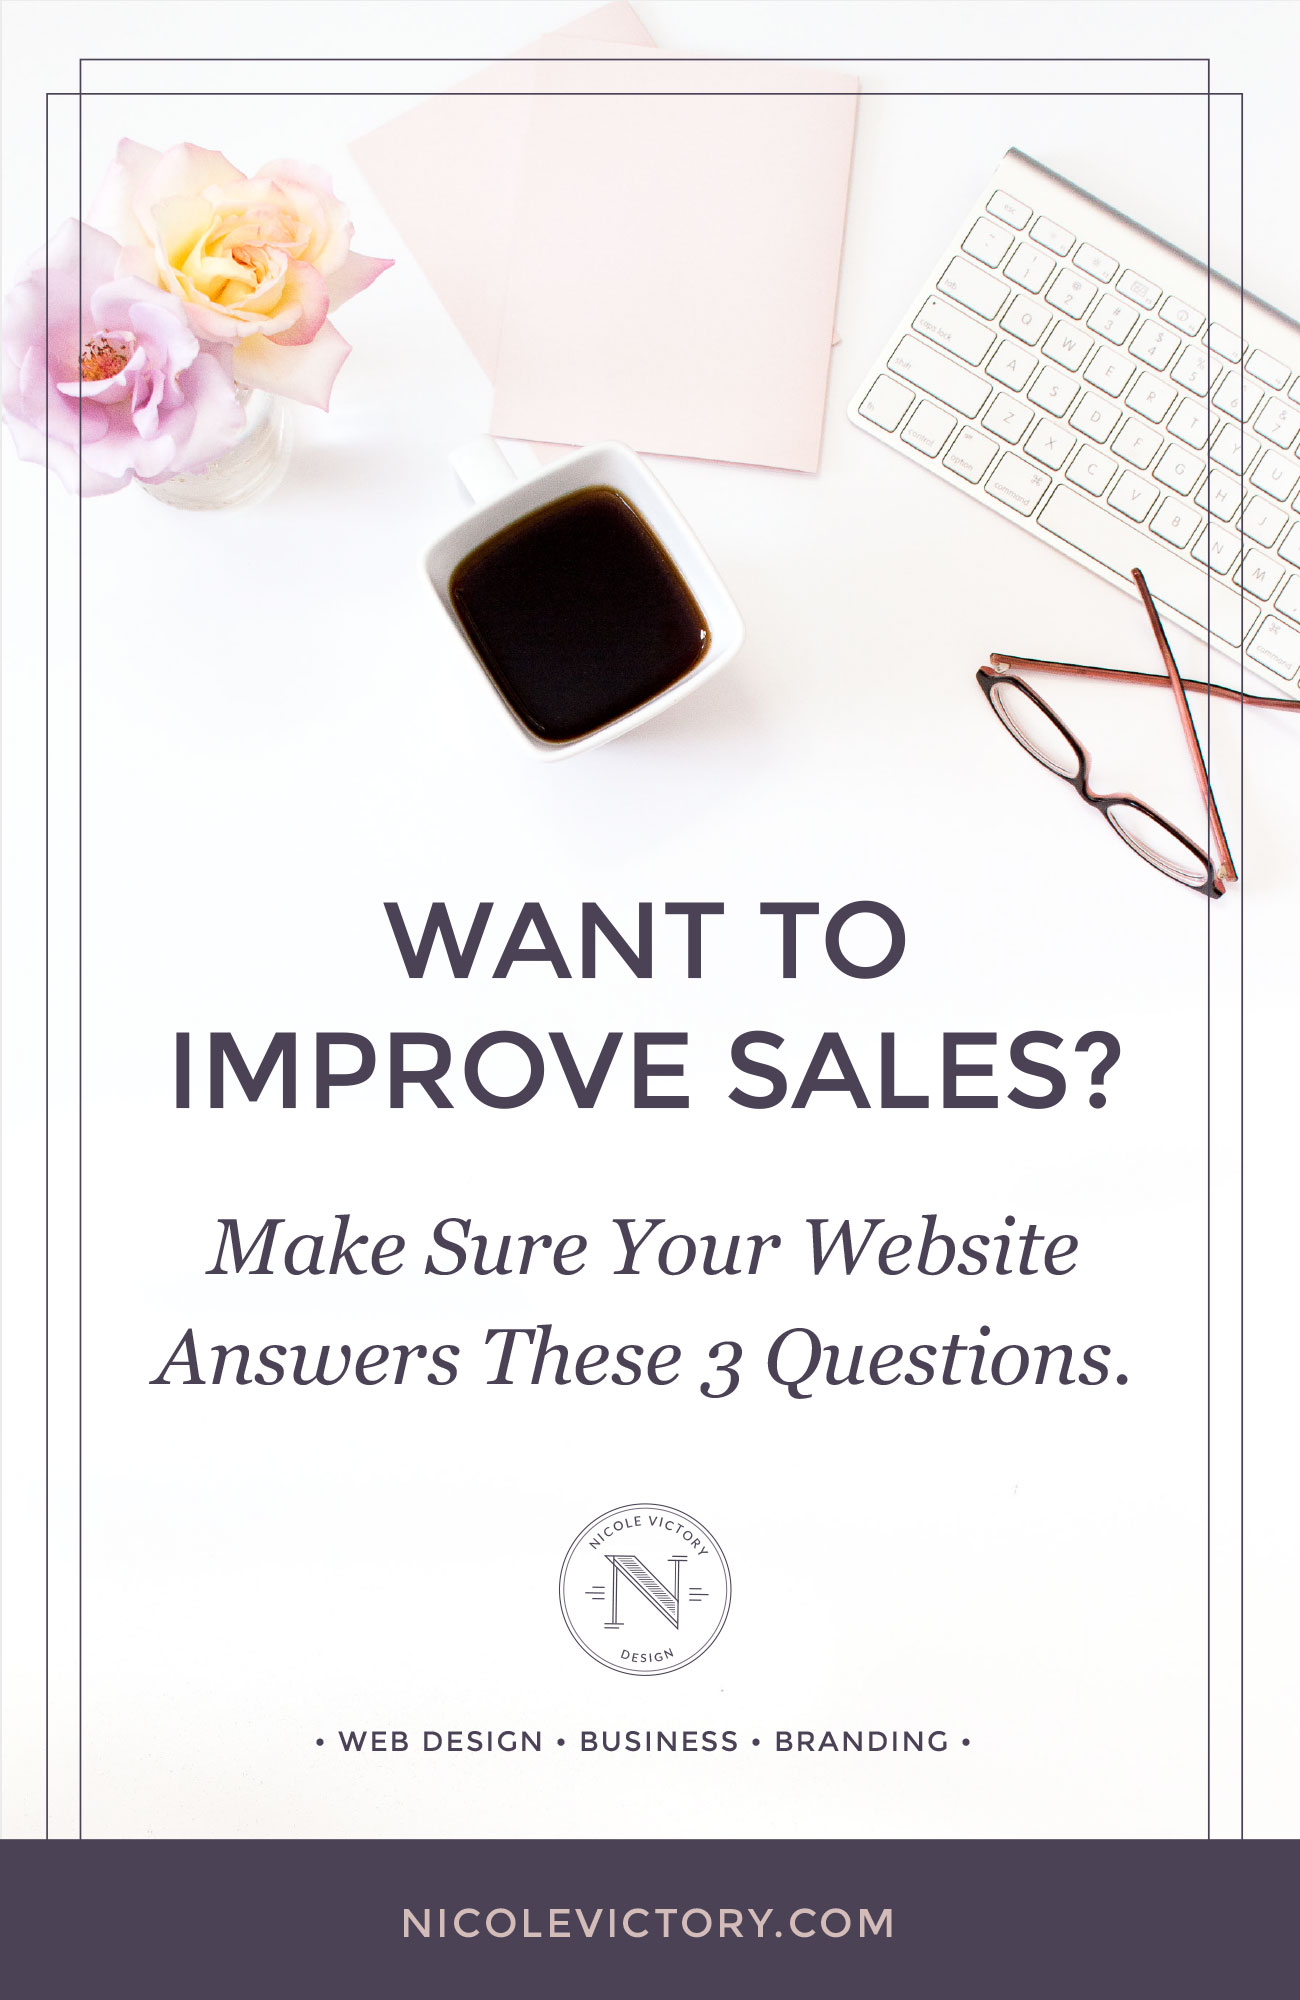 Want to improve sales? Make sure your website answers these 3 questions | Nicole Victory Design